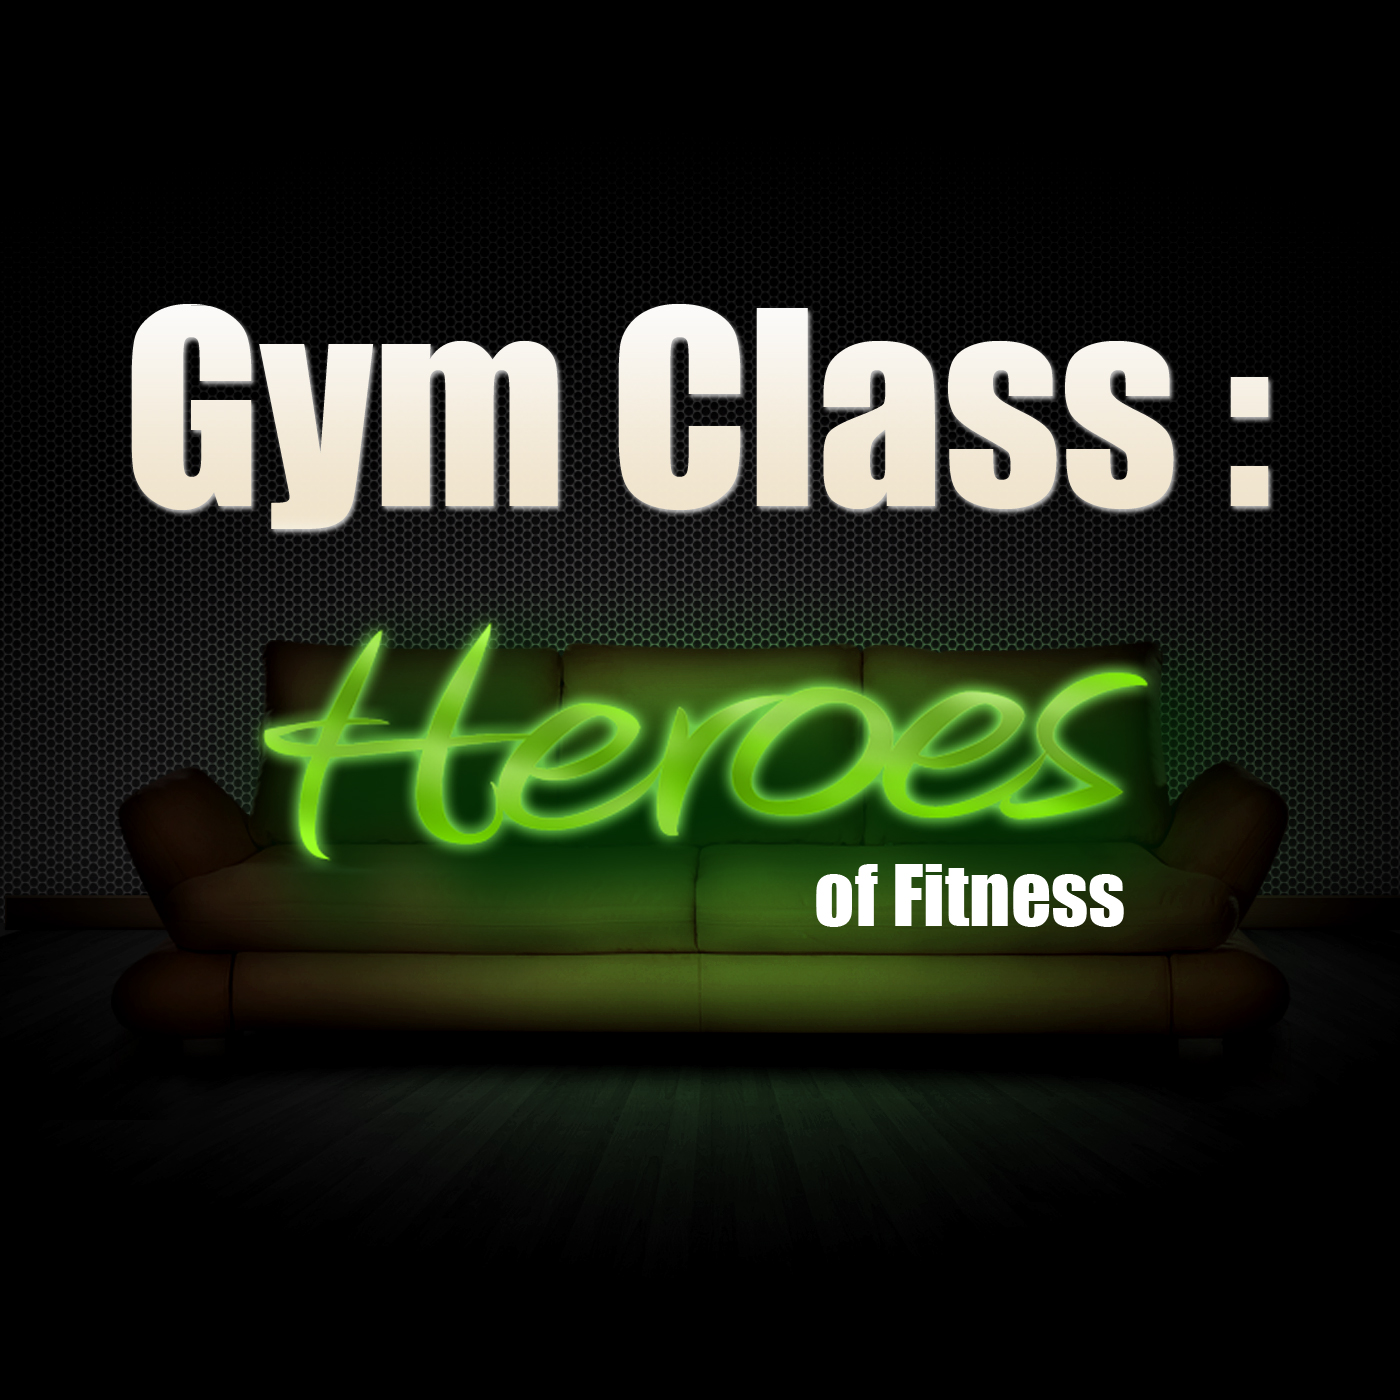 Intro: The Story Behind Gym Class: Heroes of Fitness